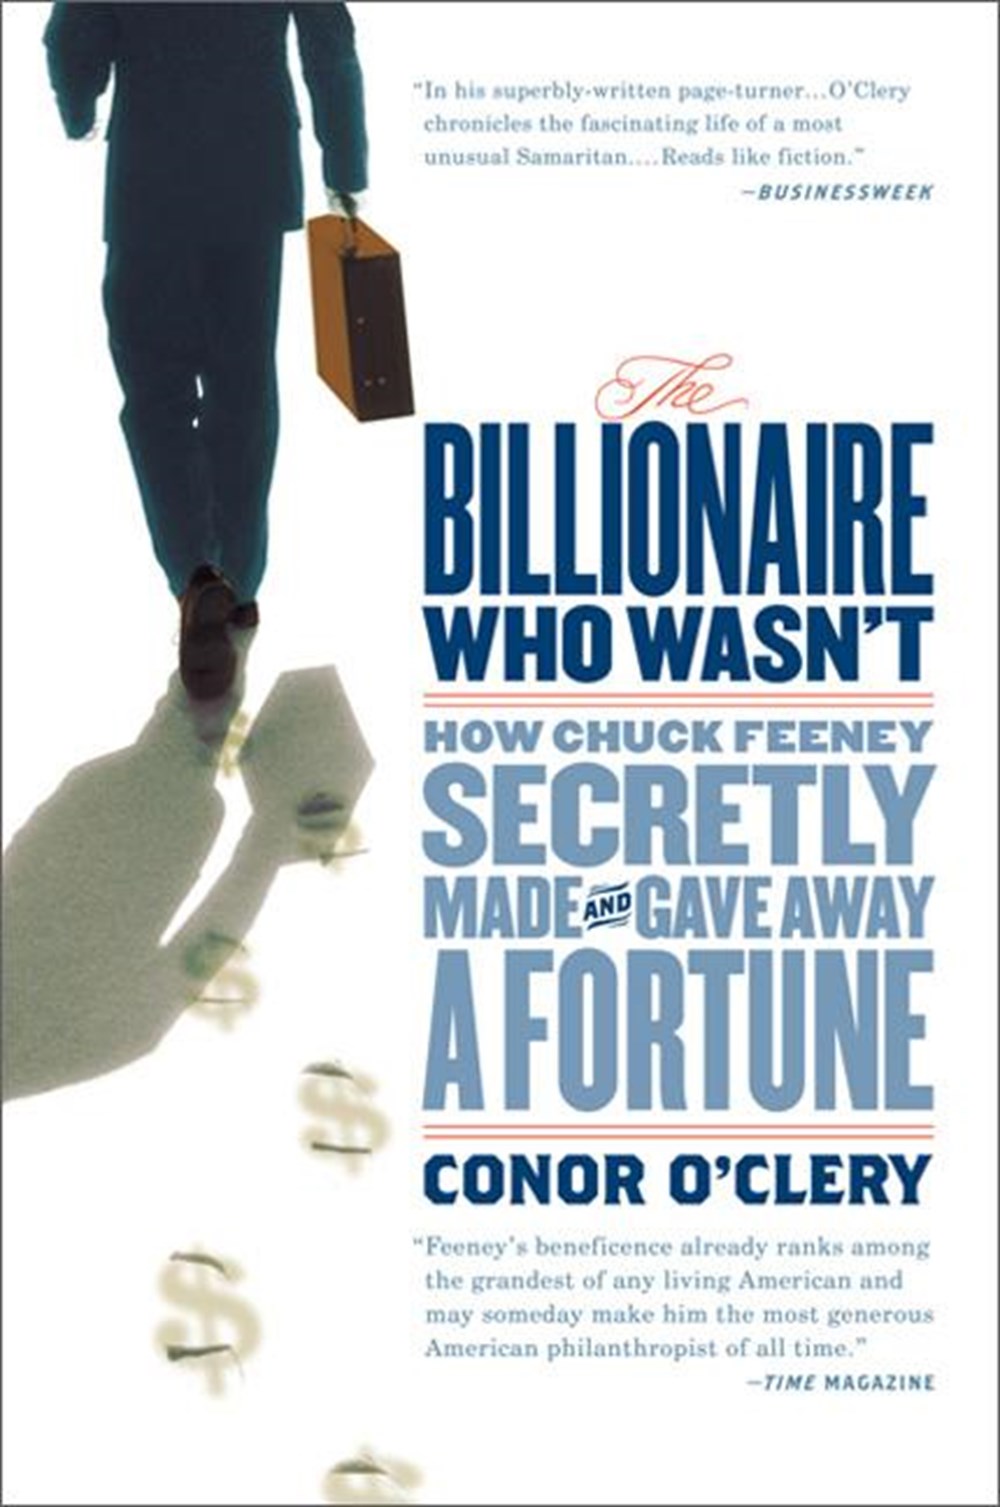 Billionaire Who Wasn't: How Chuck Feeney Secretly Made and Gave Away a Fortune